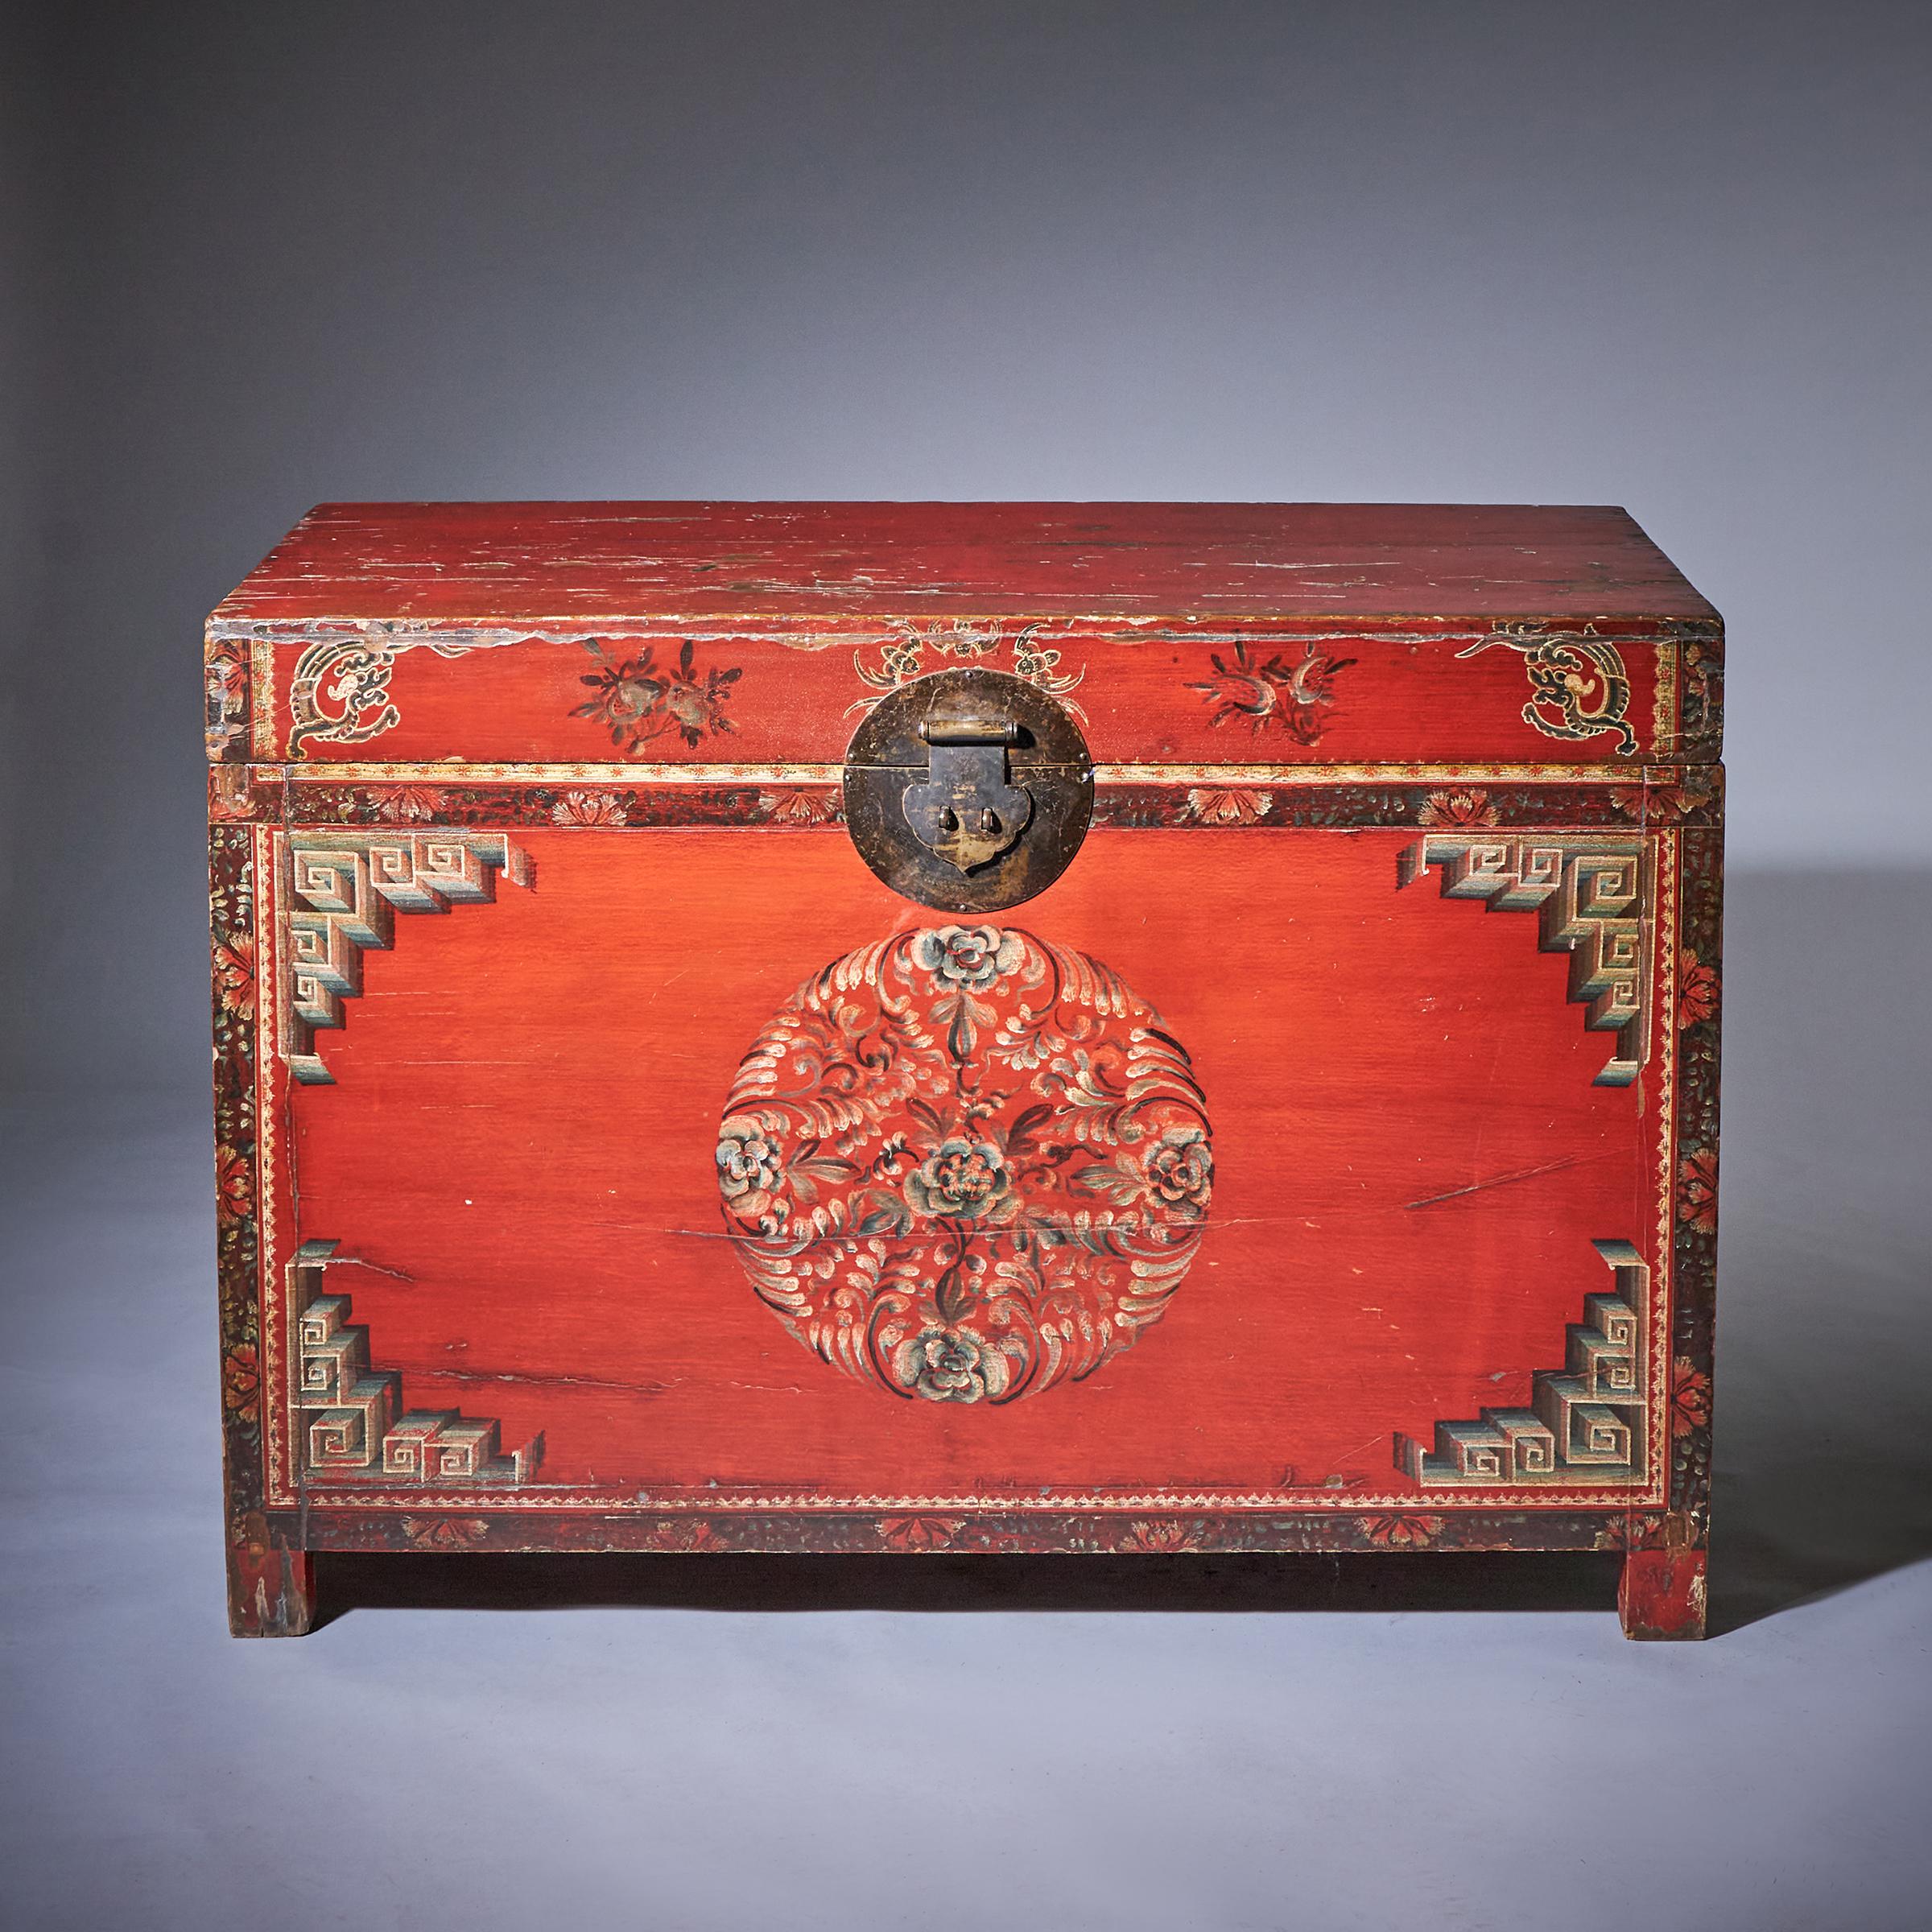 A delightful late 19th / early 20th-century Tibetan red lacquer chest of large scale, with richly patinated and distressed surfaces throughout. Attractively hand-painted with floral, leaf, greek key and dragons to the face, centered with the